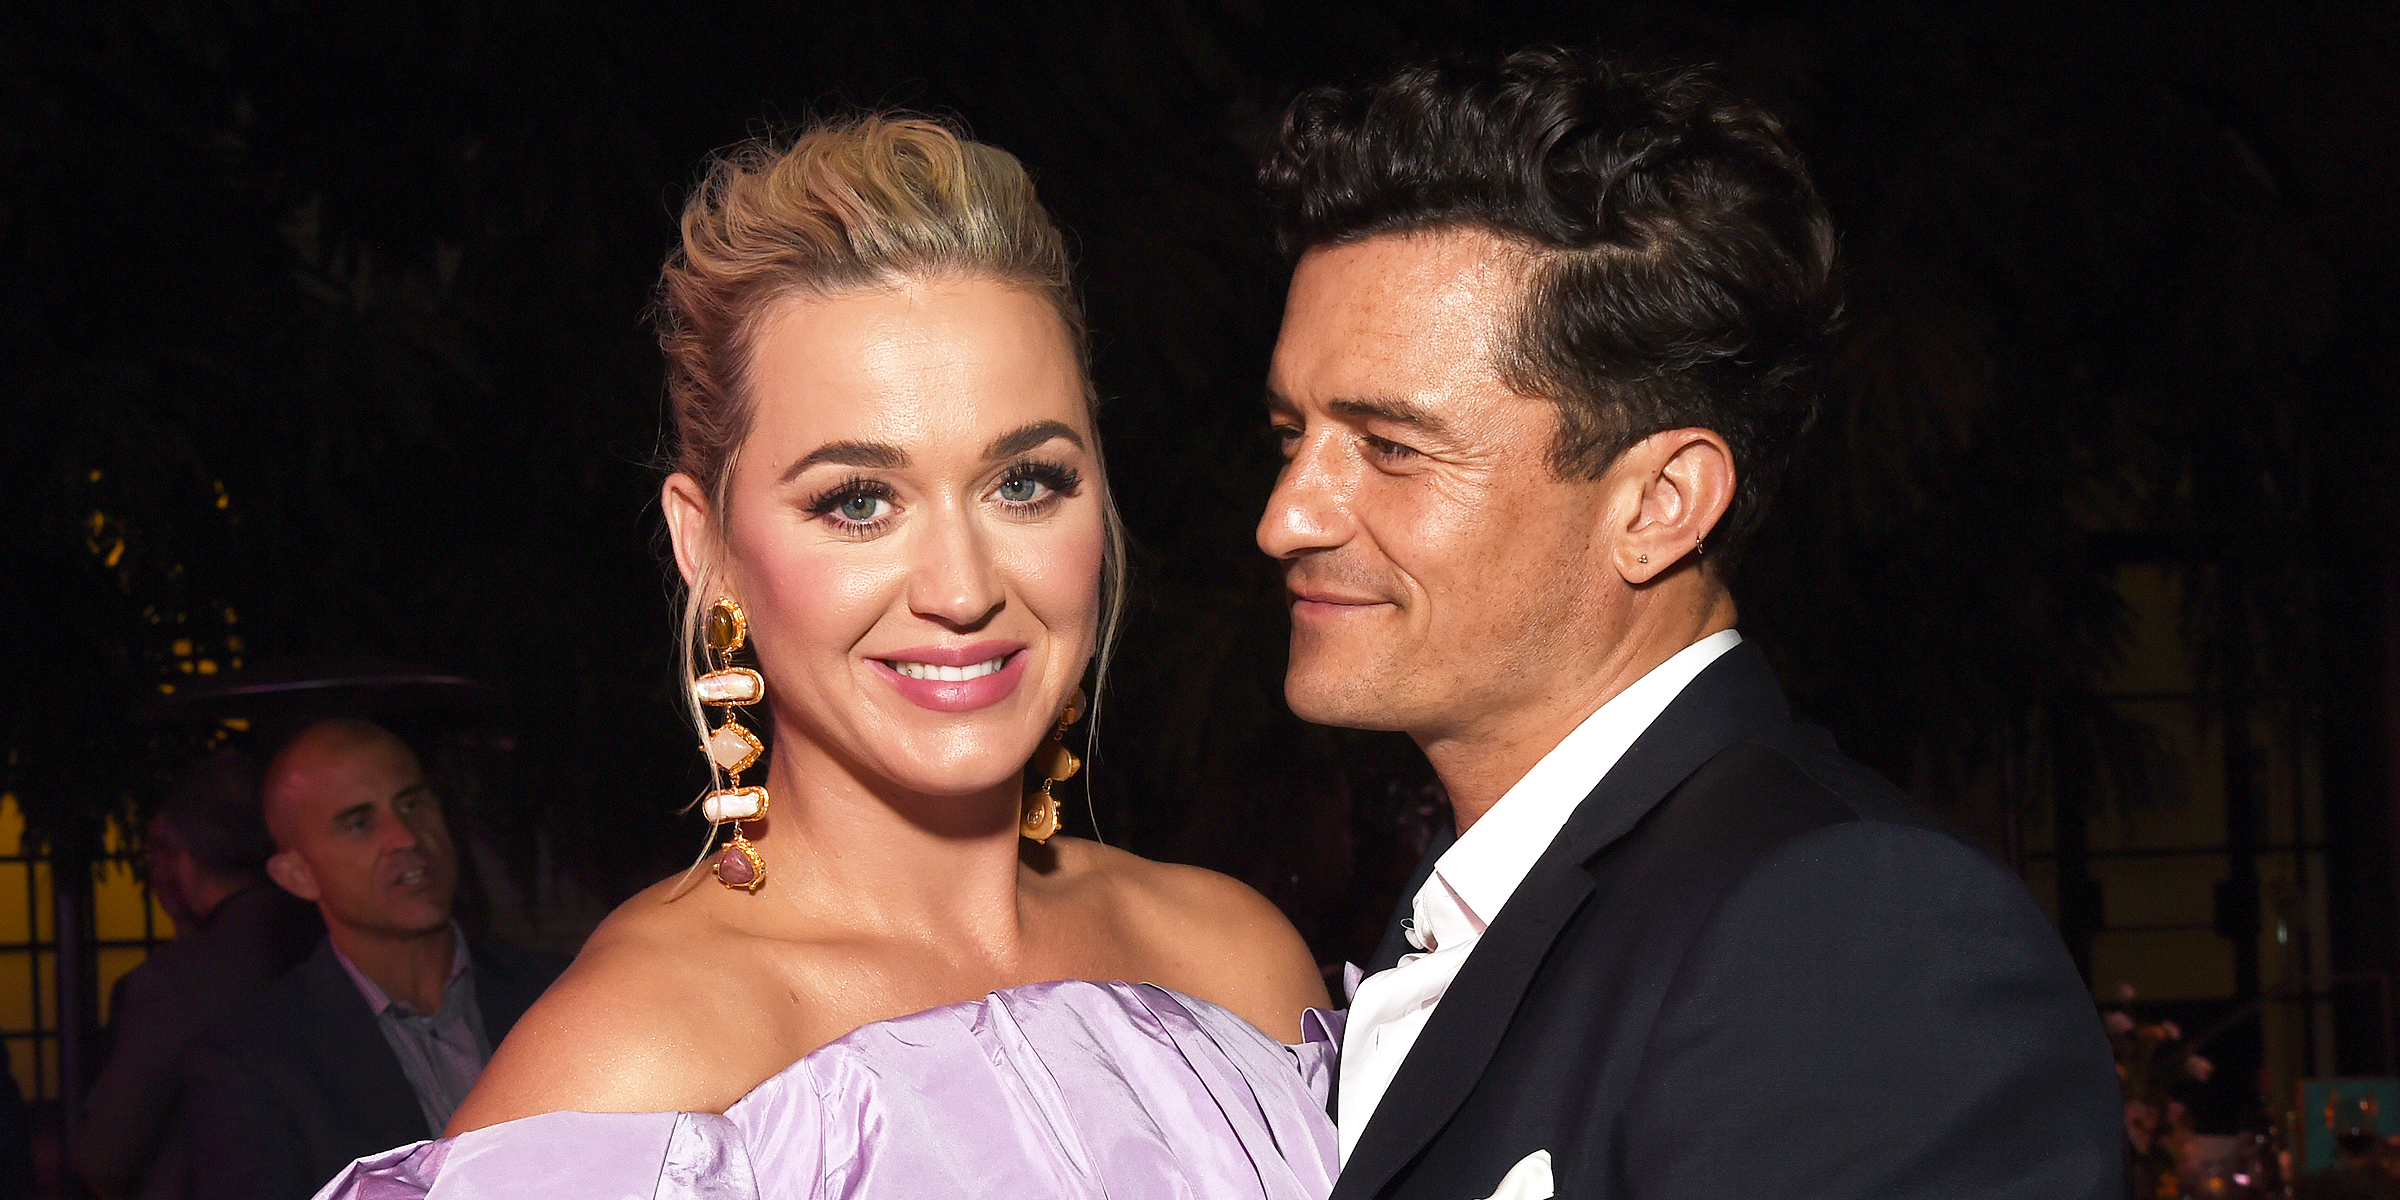 Katy Perry and Orlando Bloom | Source: Getty Images